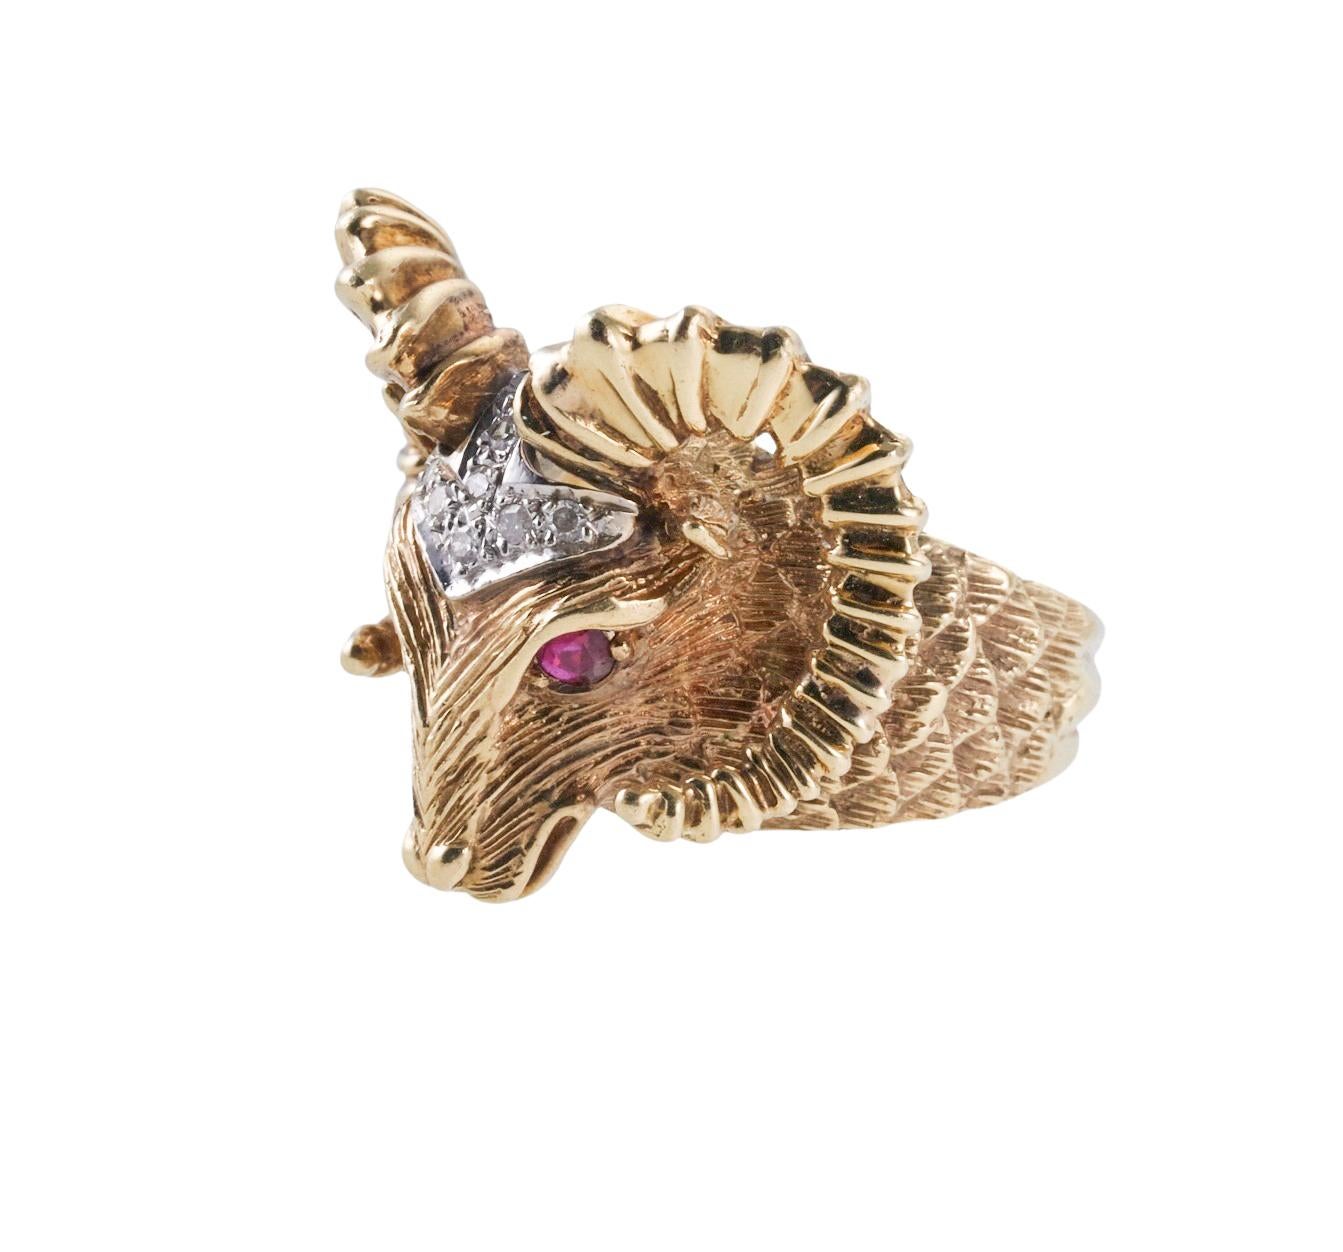 14k yellow gold vintage ram's head ring, set with approx. 0.05ctw in diamonds and ruby eyes. Ring size 7.25, top is 23mm x 26mm. Marked 14k. Weight of the piece - 19.4 grams. 